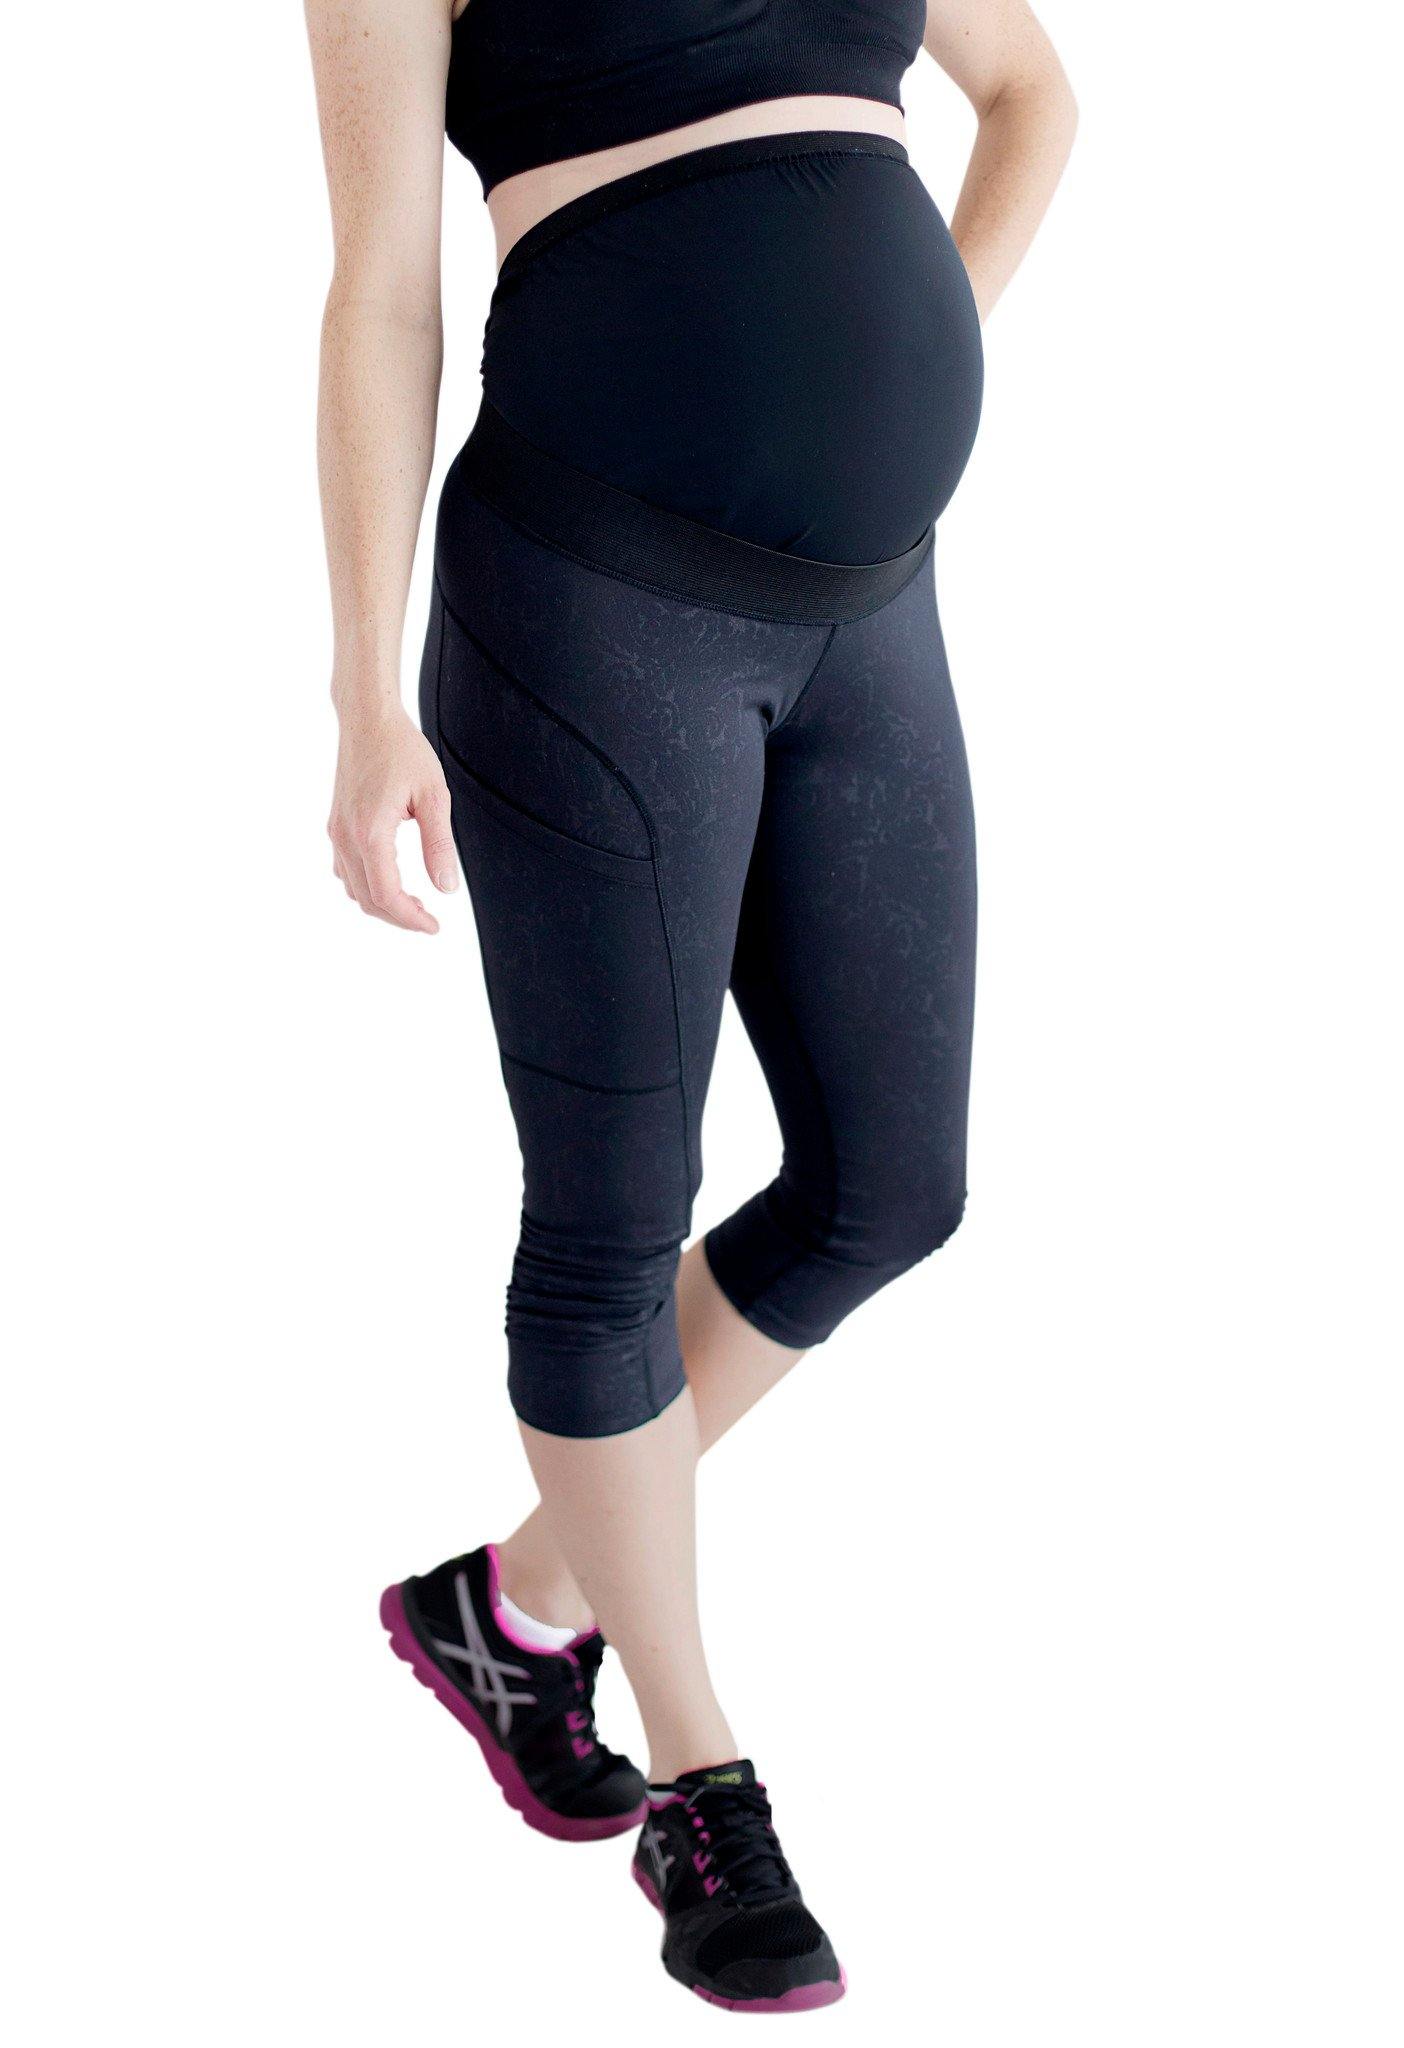 Hi Clasmix Maternity Capri Leggings Over The Belly Butt Lift - Buttery Soft  Non-See-Through Workout Pregnancy Leggings